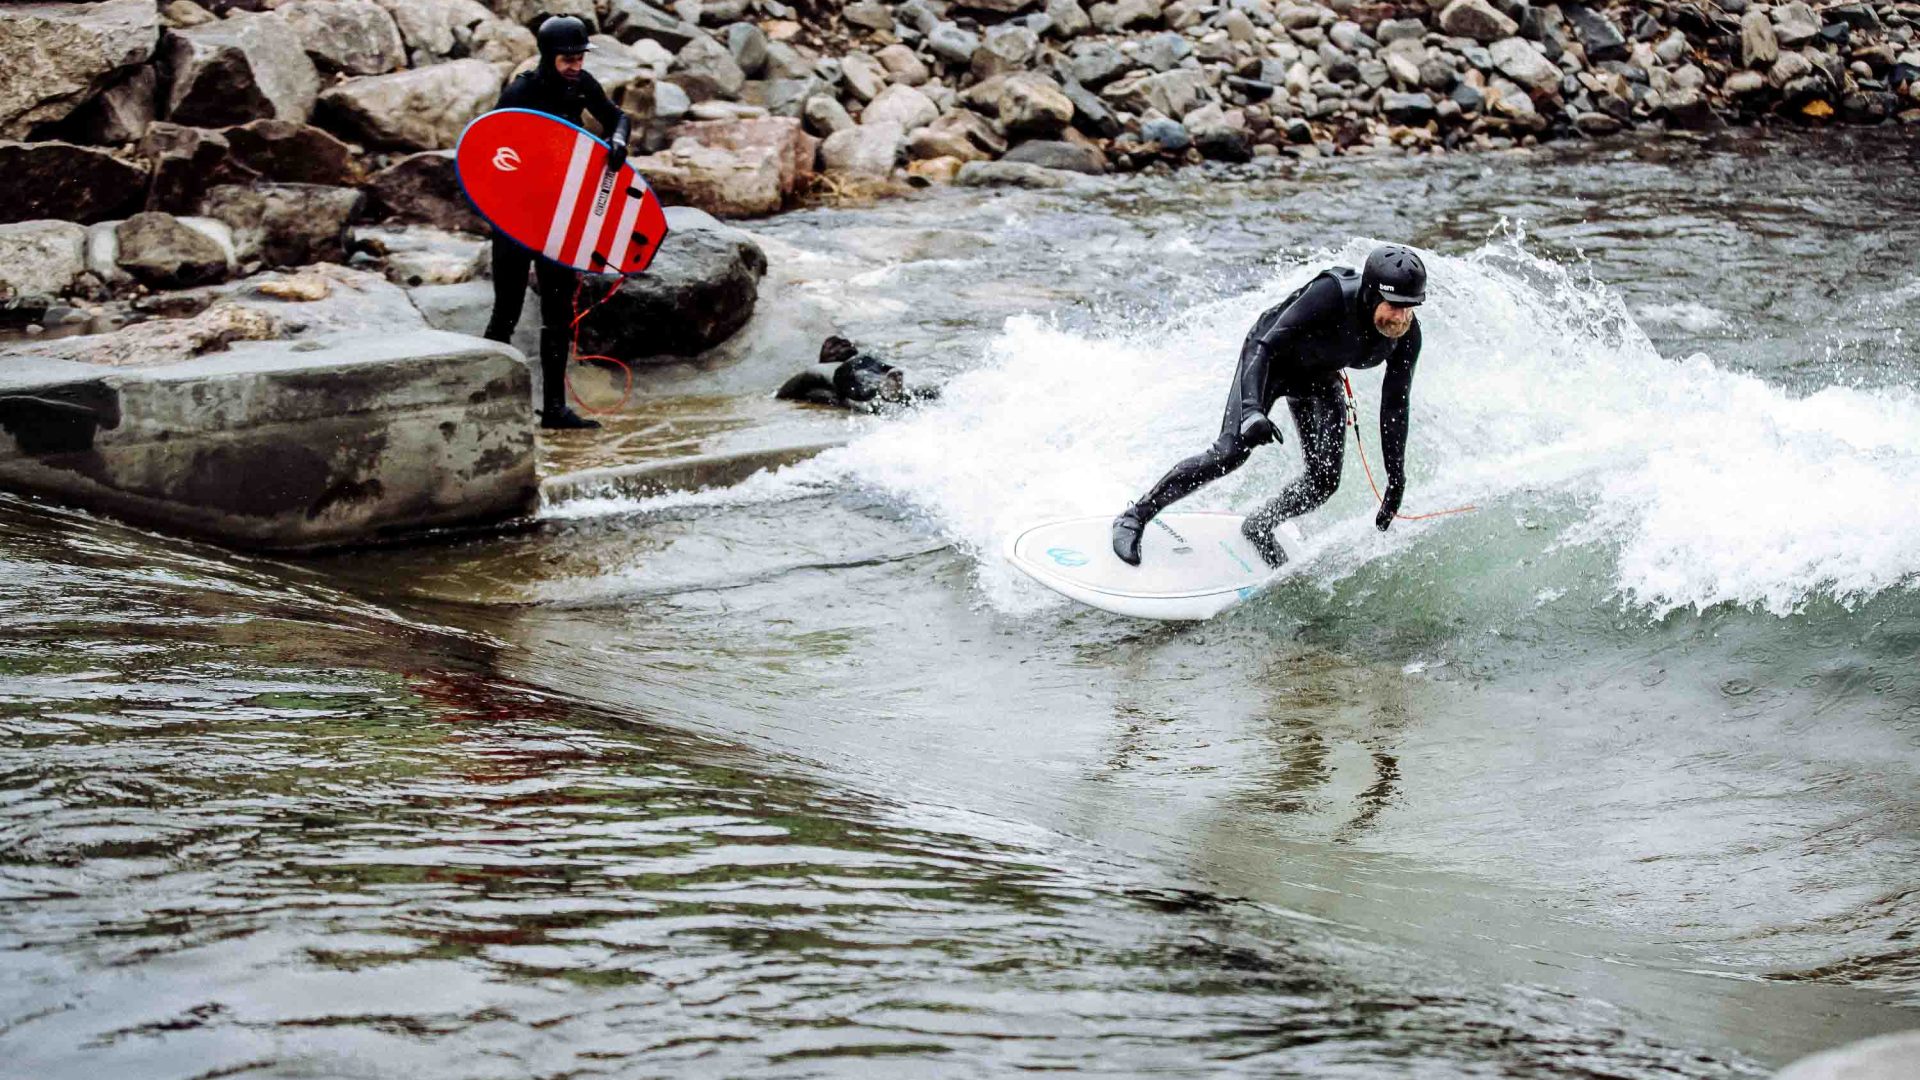 One man watches on while another surfs a river wave.